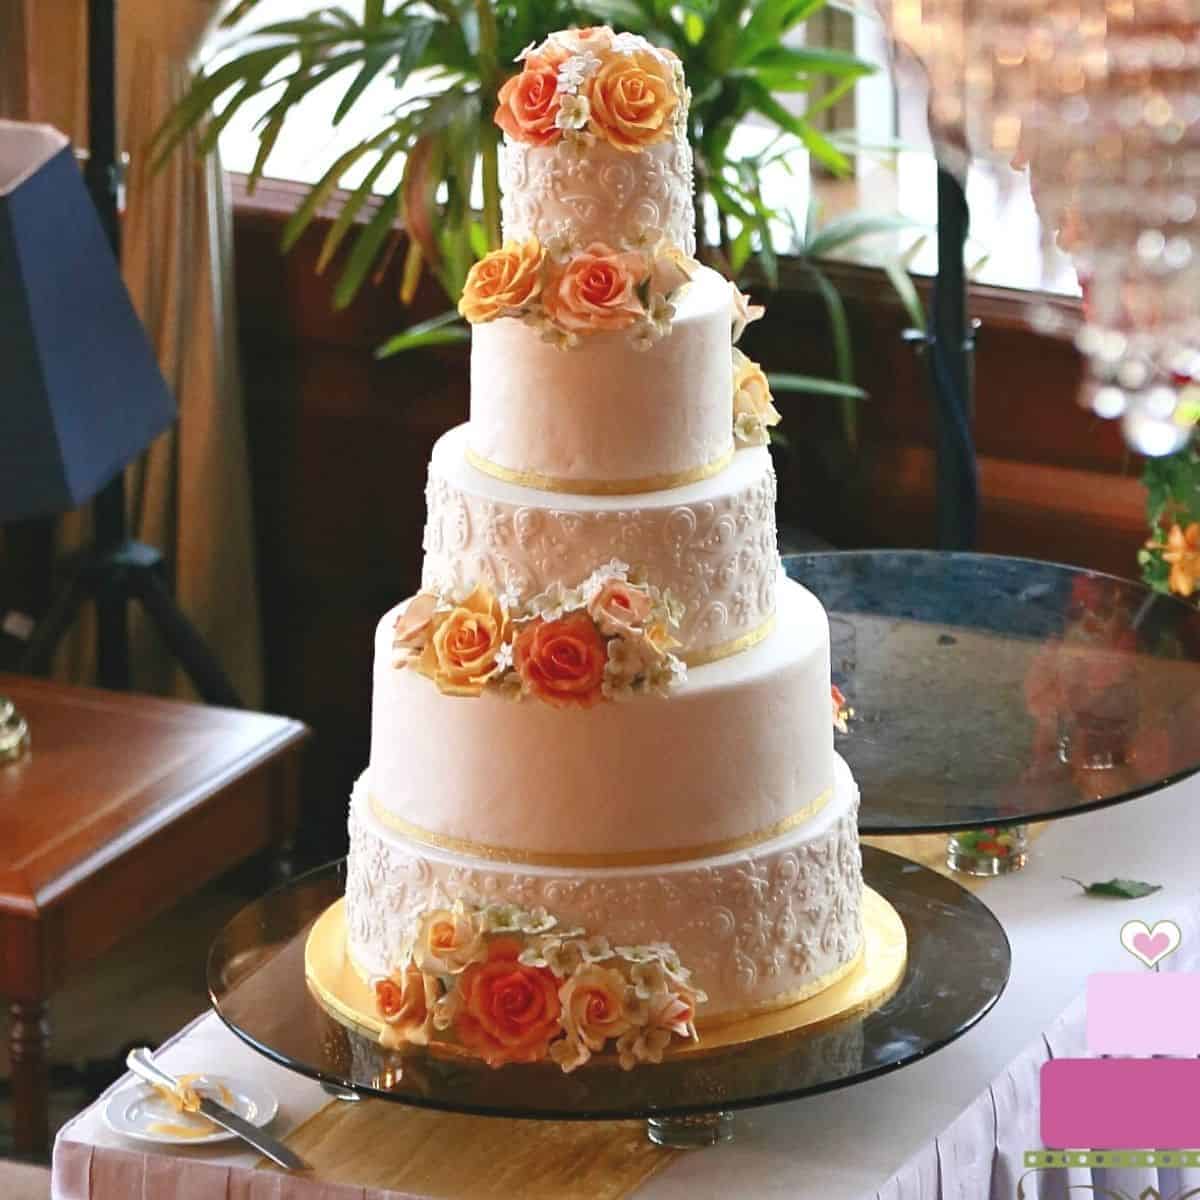 5 Tier Wedding Cake In Pretty Autumn Colors Decorated Treats